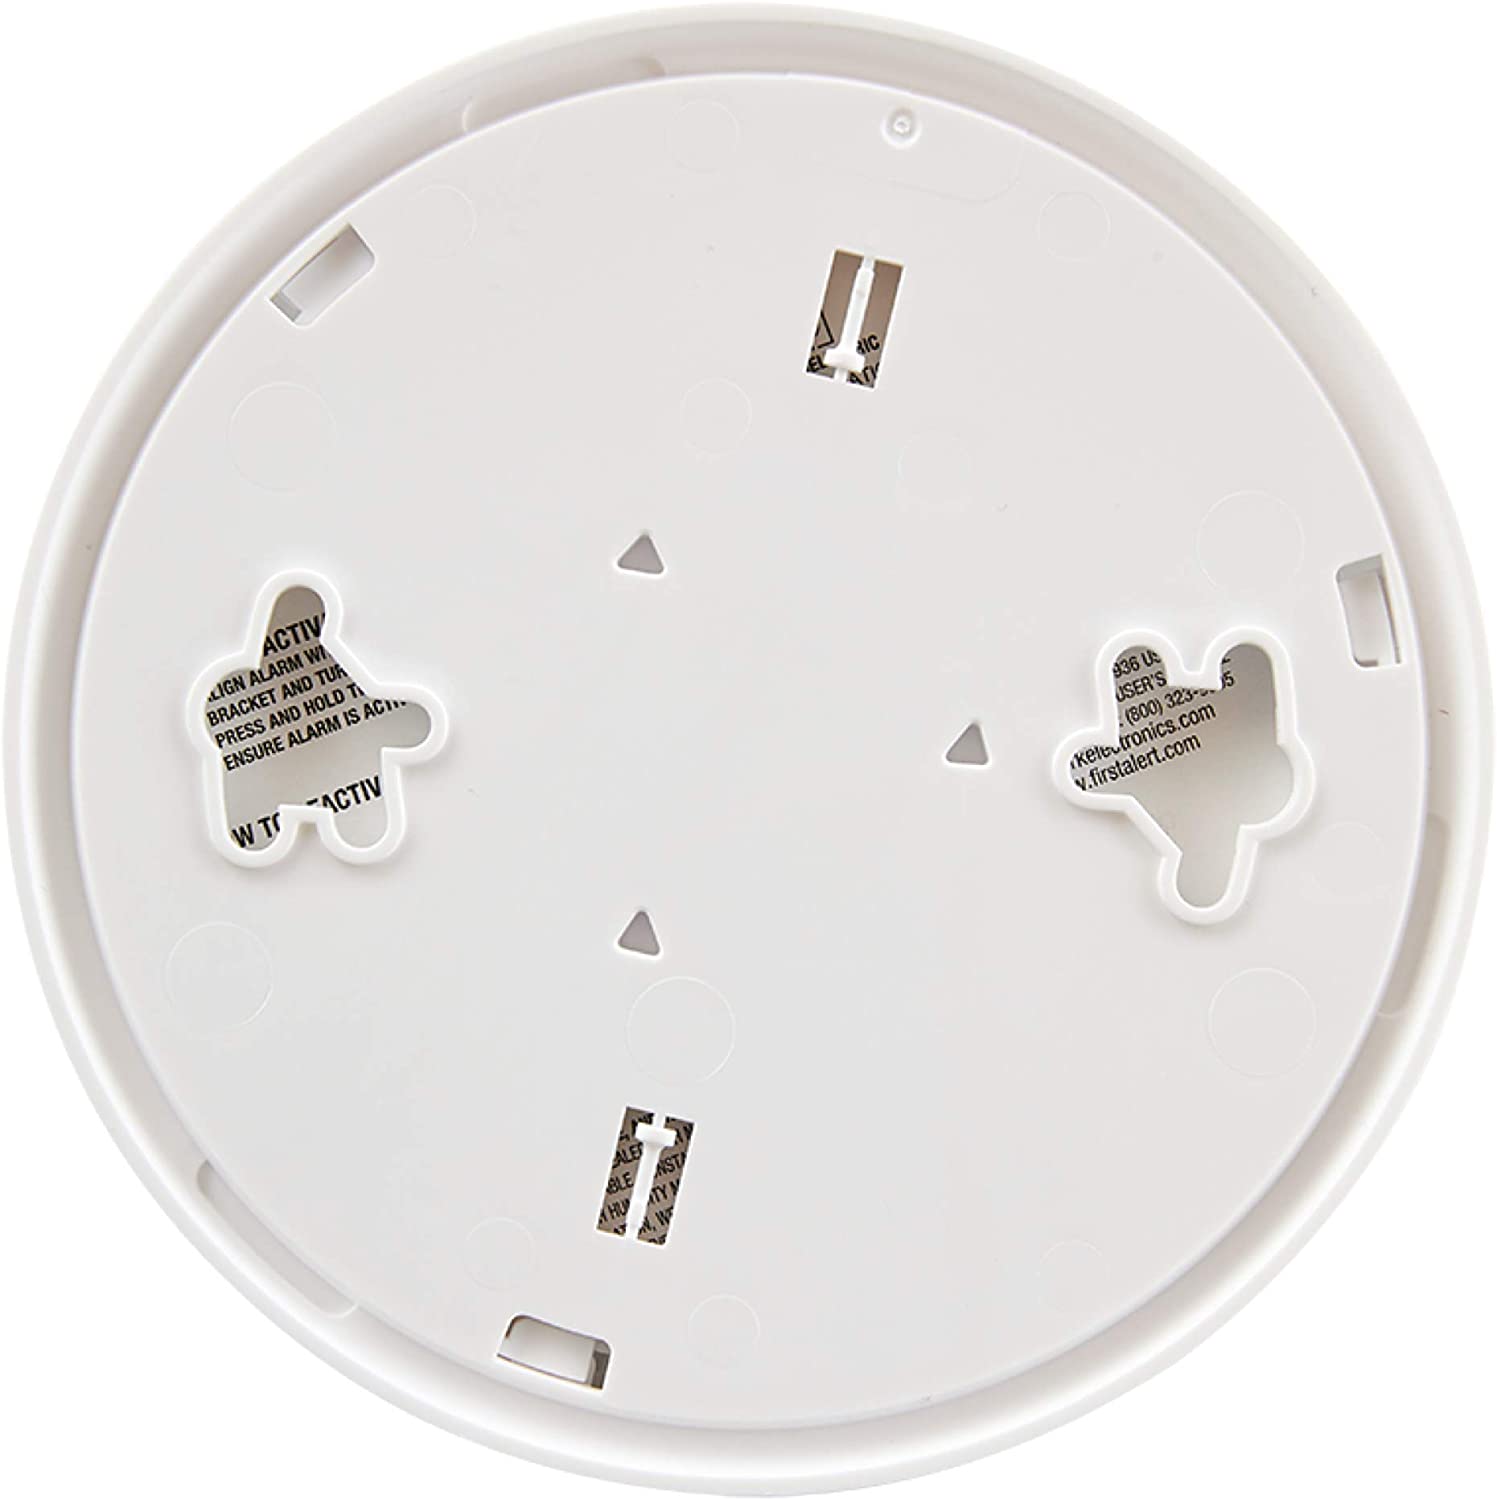 2-Pack First Alert 10 Year Photoelectric Smoke Alarm - Long-Lasting Protection